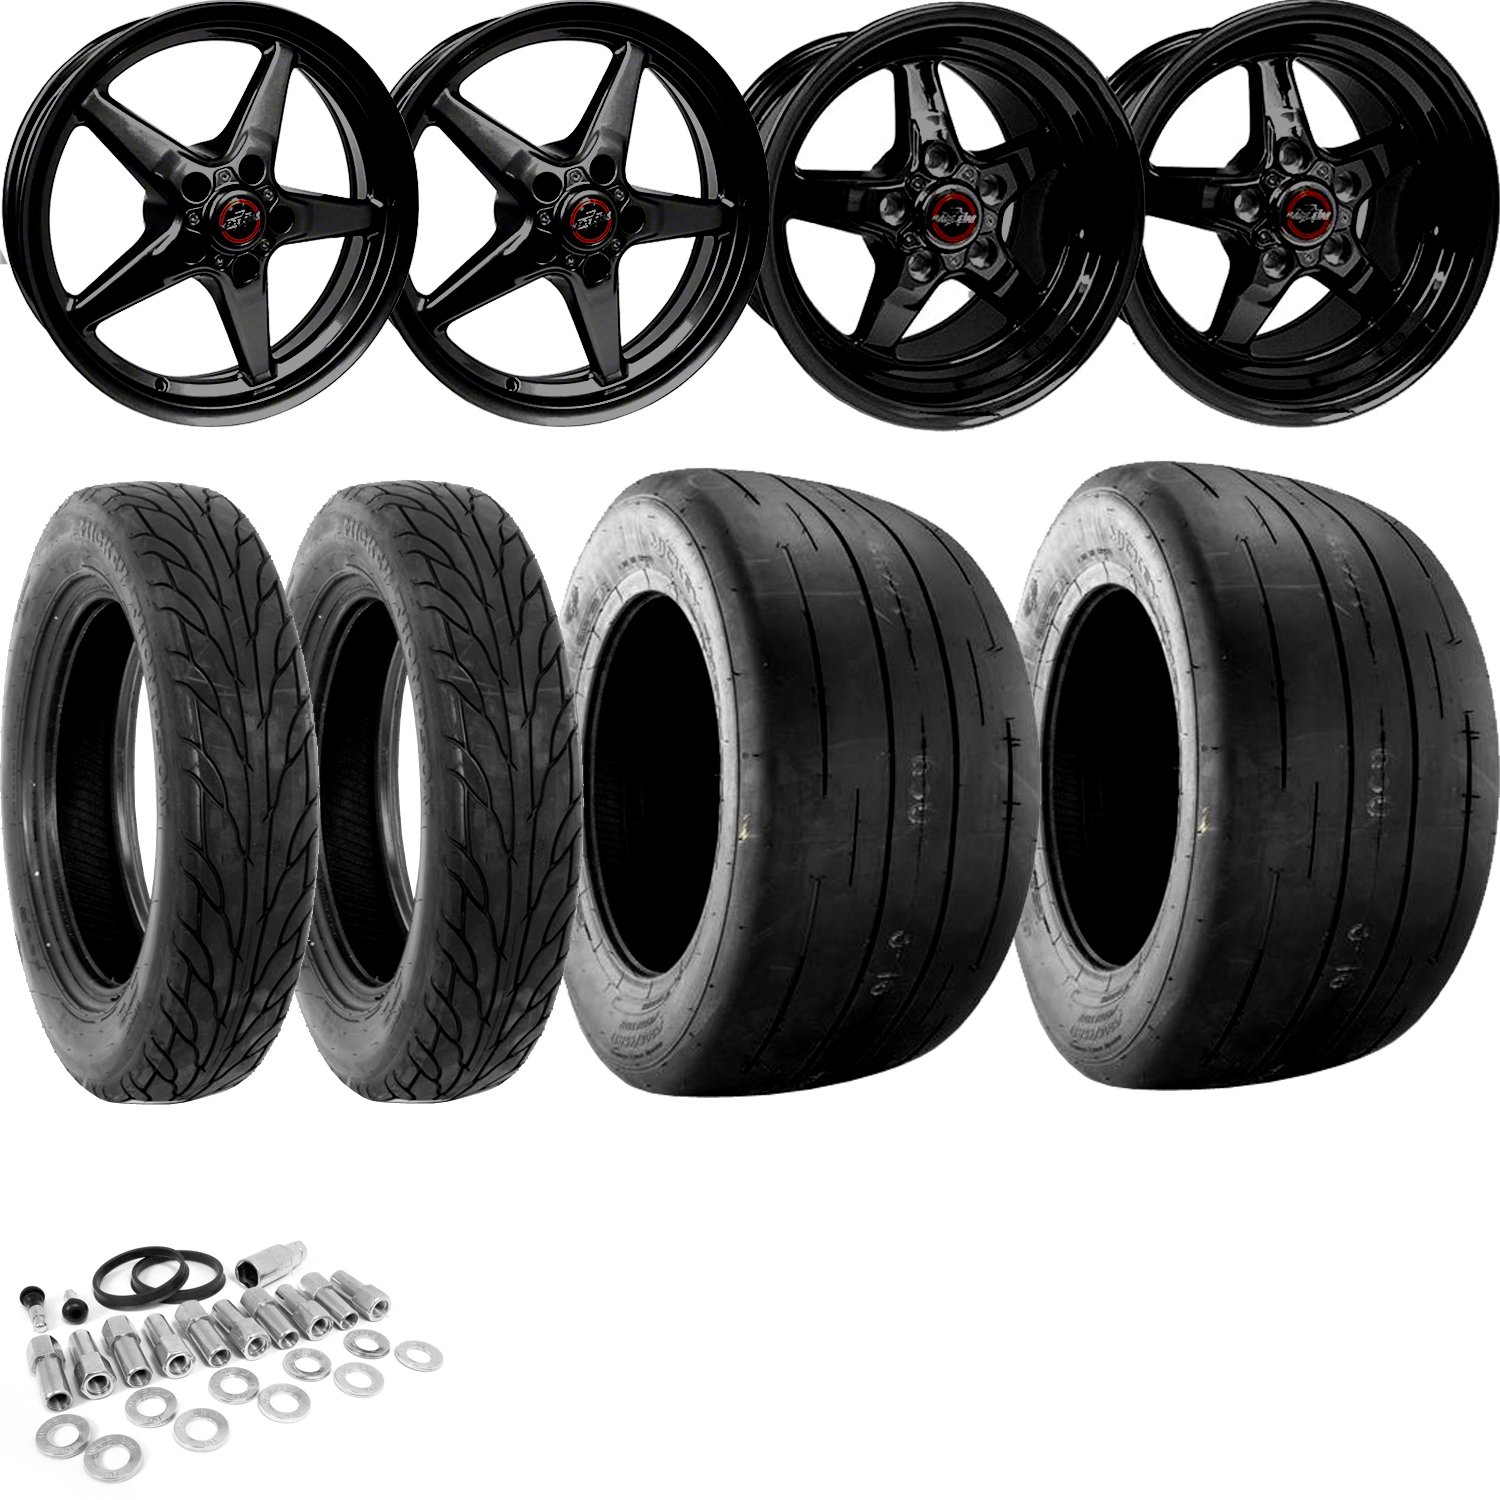 BIG MEATS" Wheel and Tire Kit For 2006-2019 Dodge Challenger - JEGS